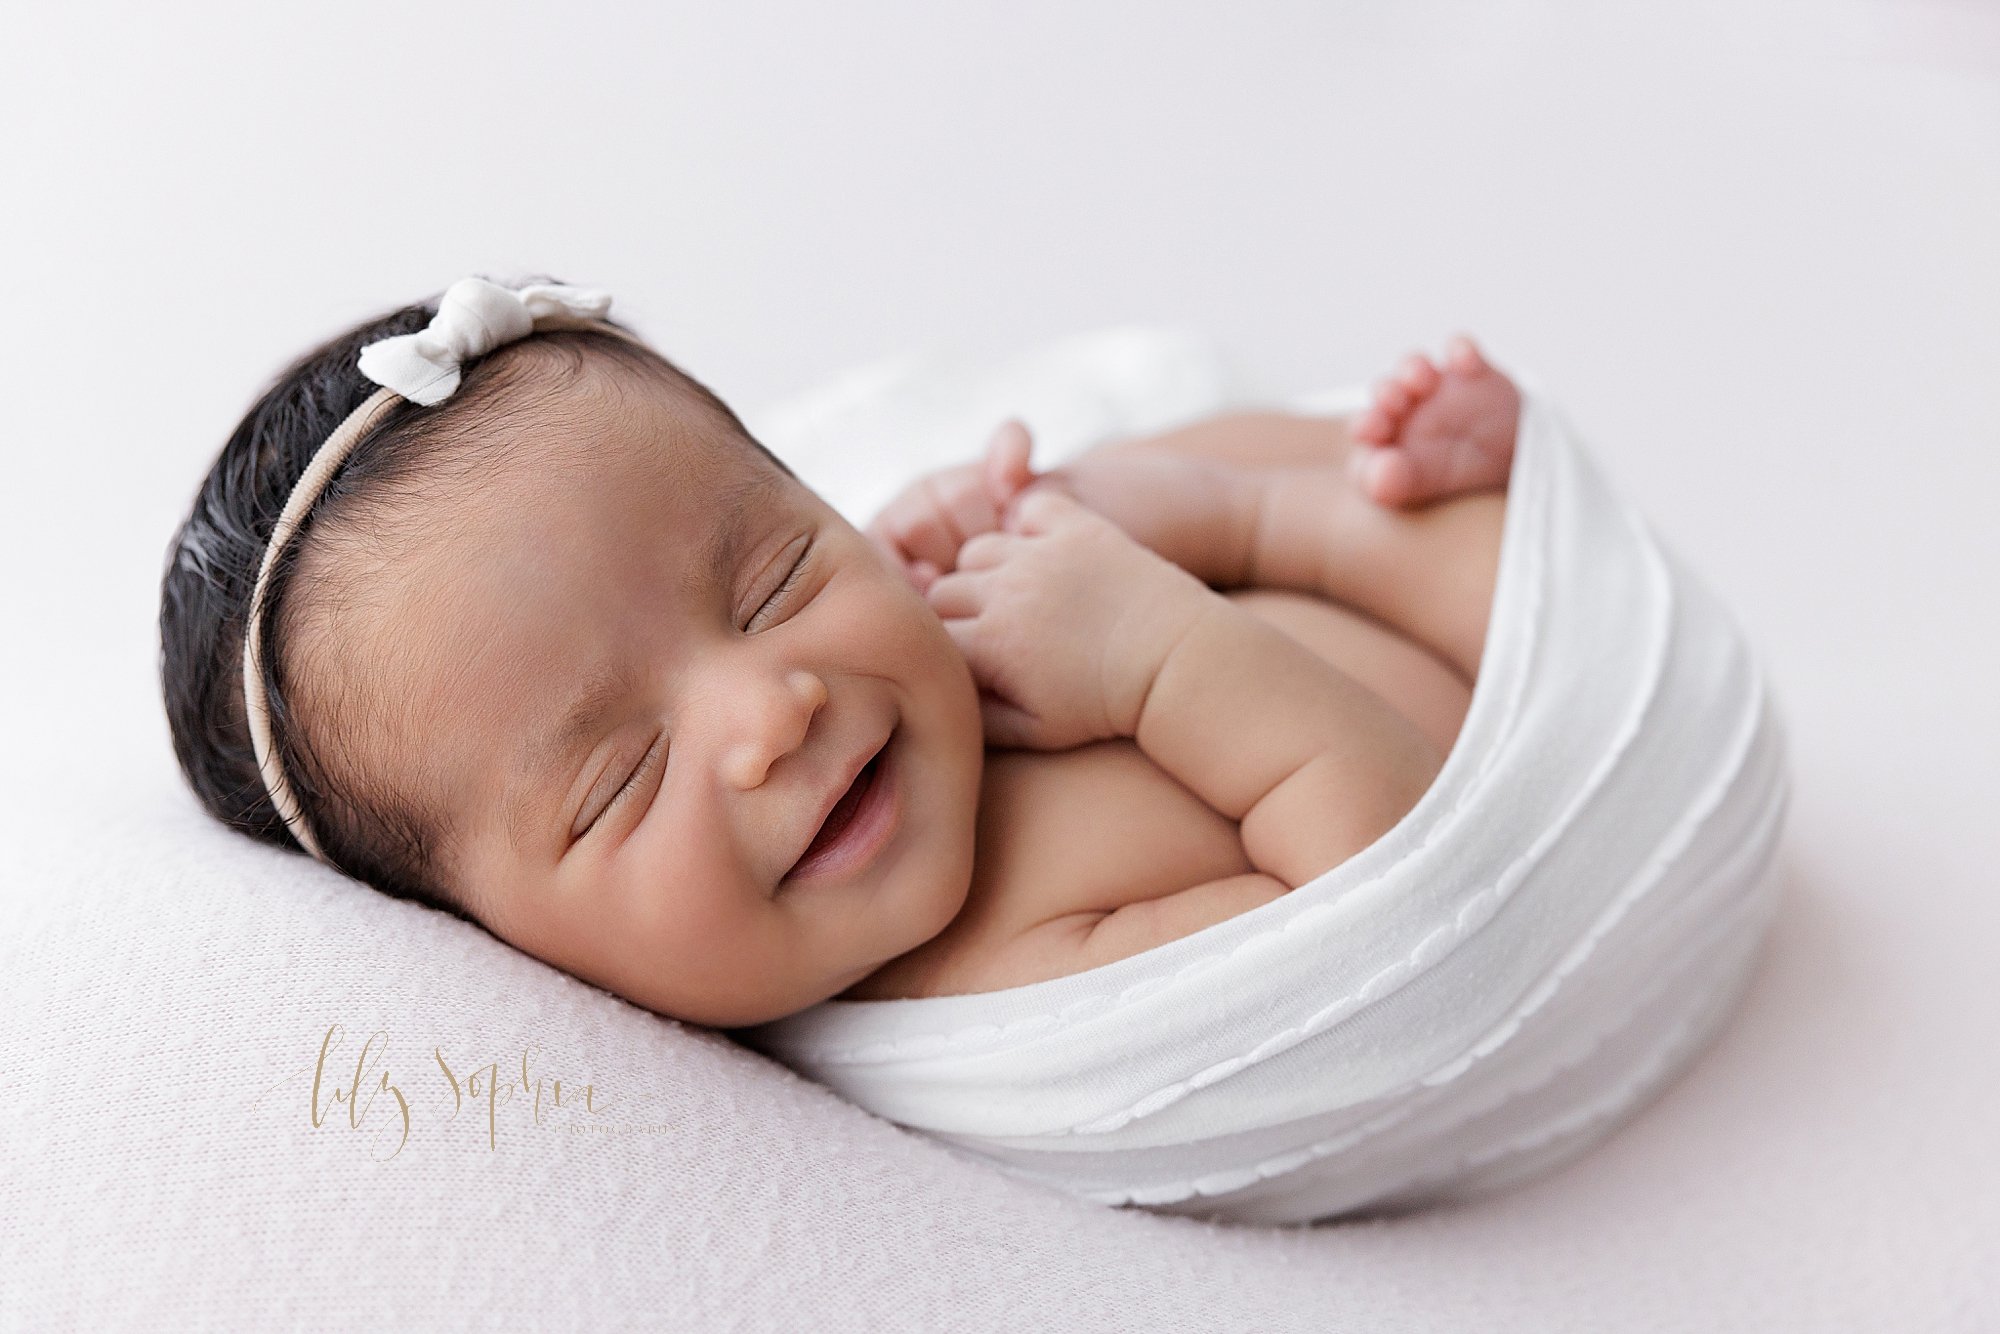  Newborn portrait of a smiling newborn baby girl wearing a bow headband in her hair while she is tucked into a stretchy swaddle taken near Cumming in Atlanta in a natural light studio. 